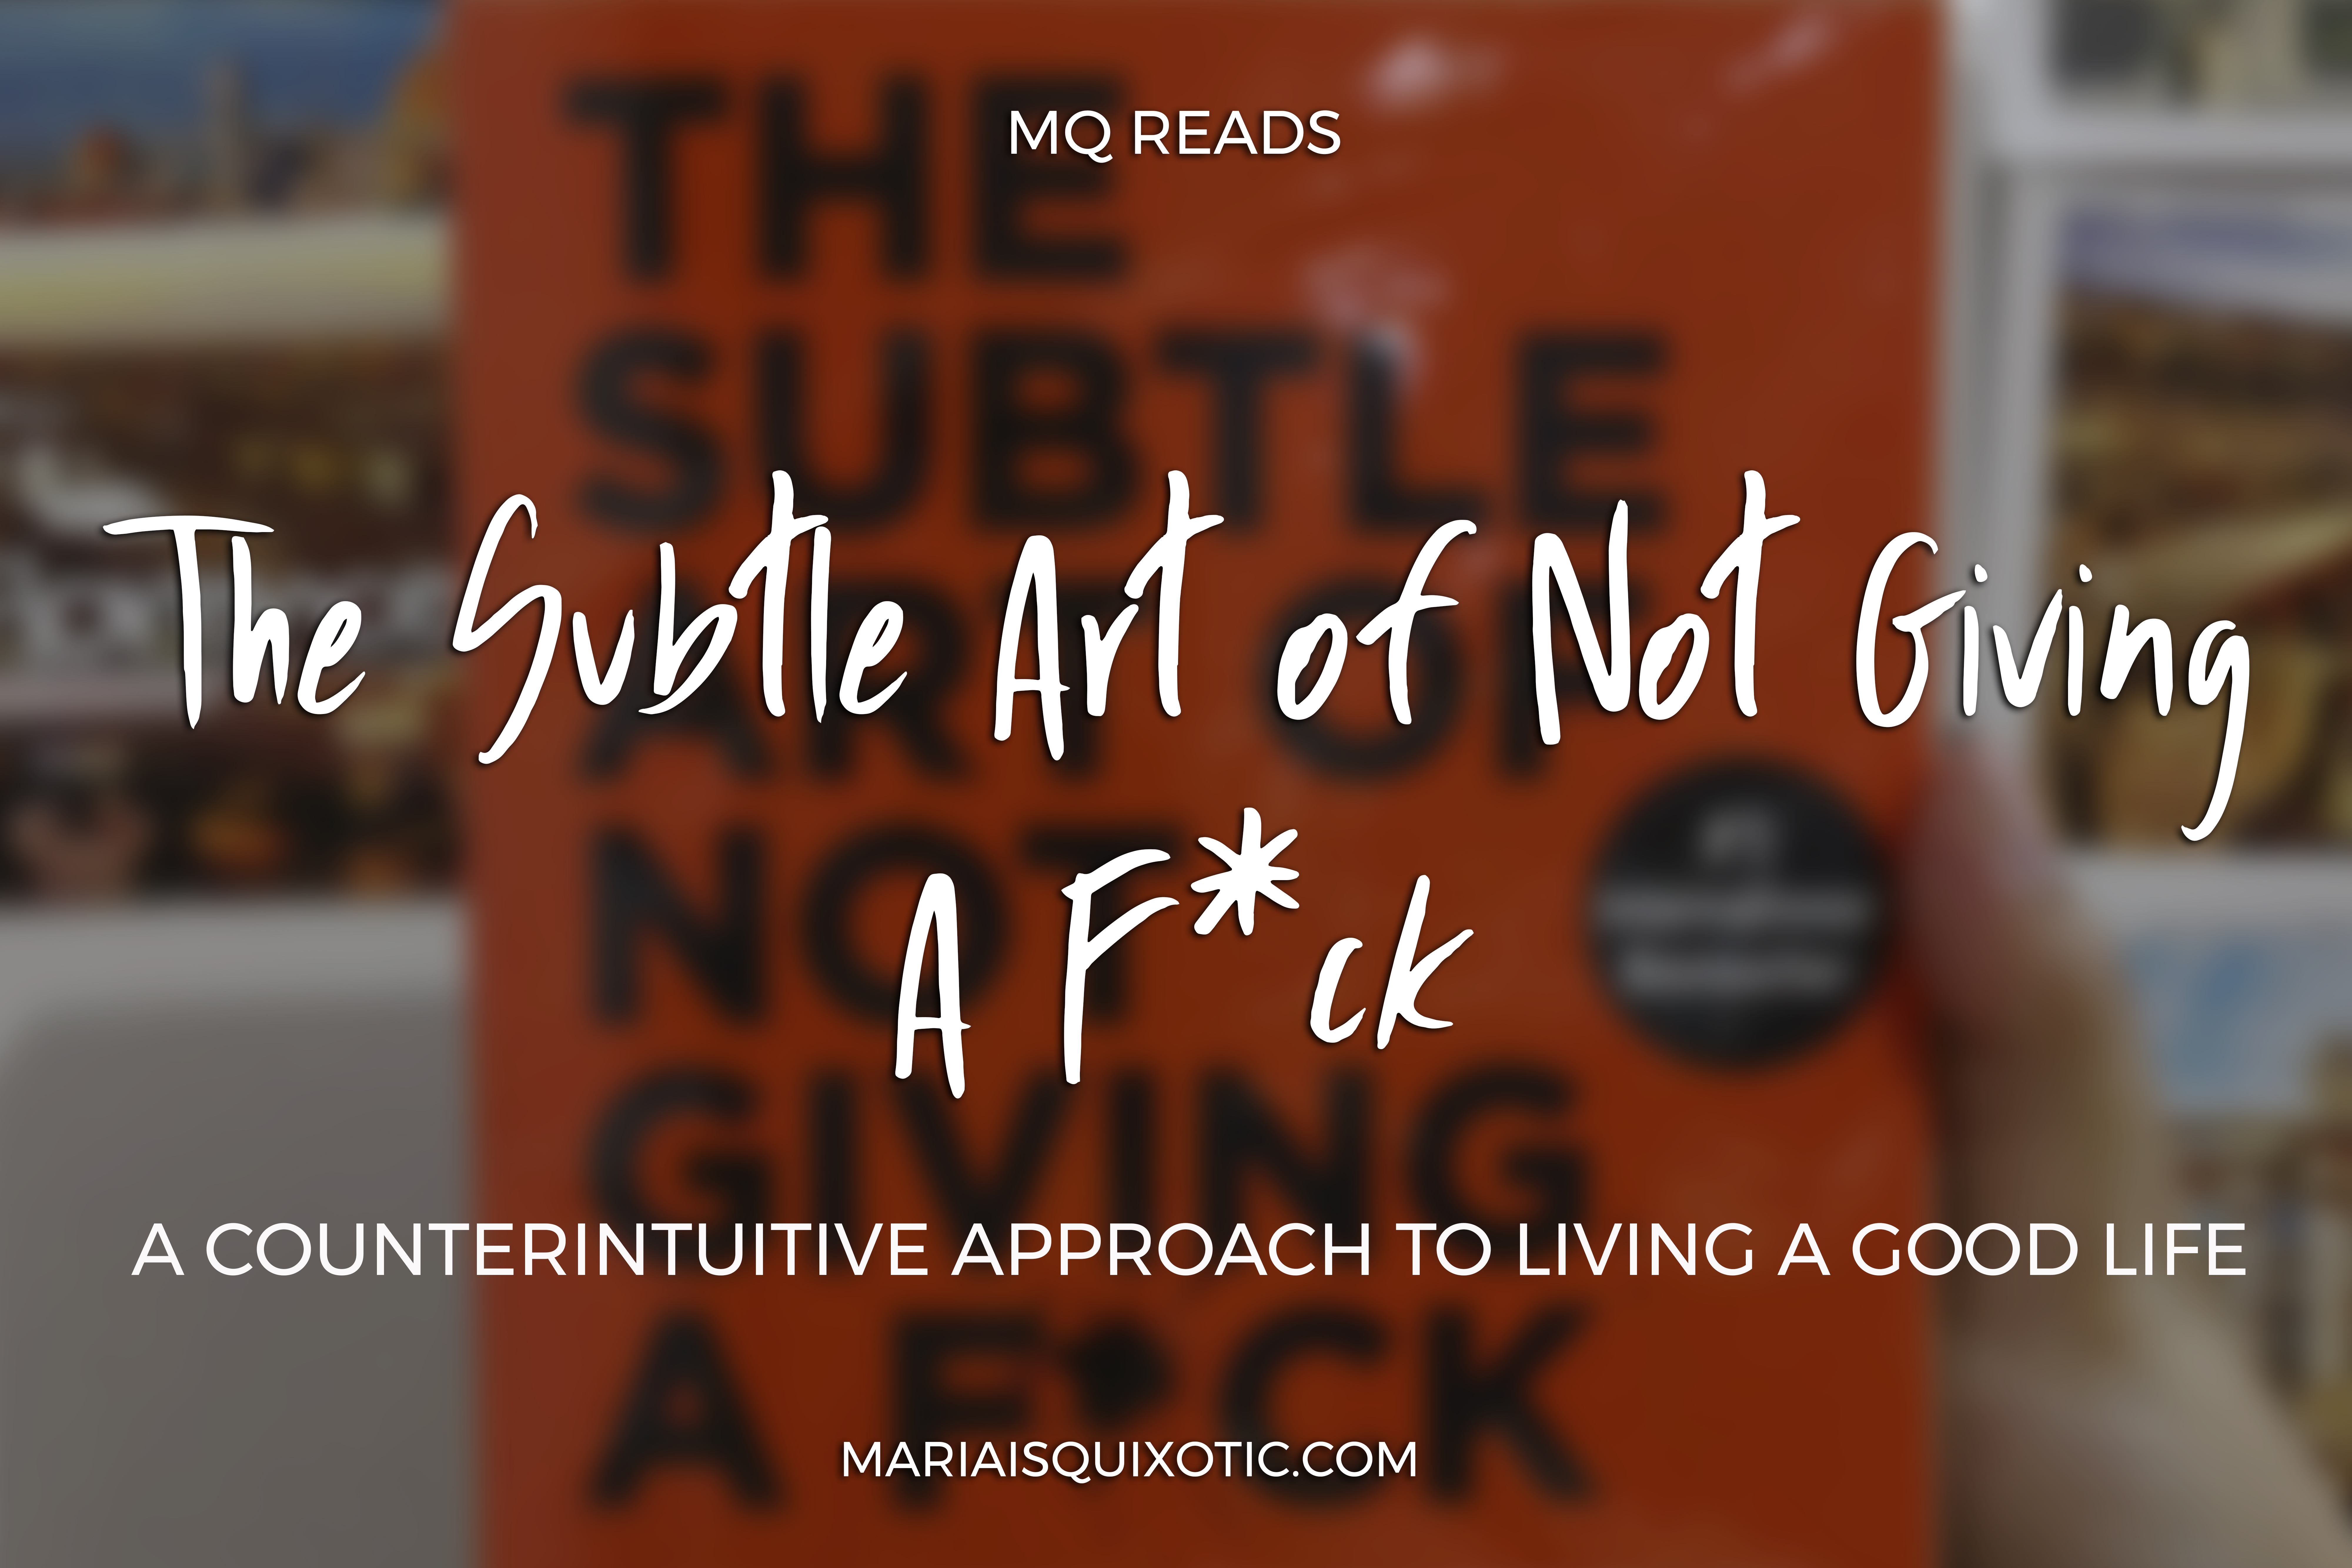 Mark Manson's The Subtle Art of Not Giving A F*ck